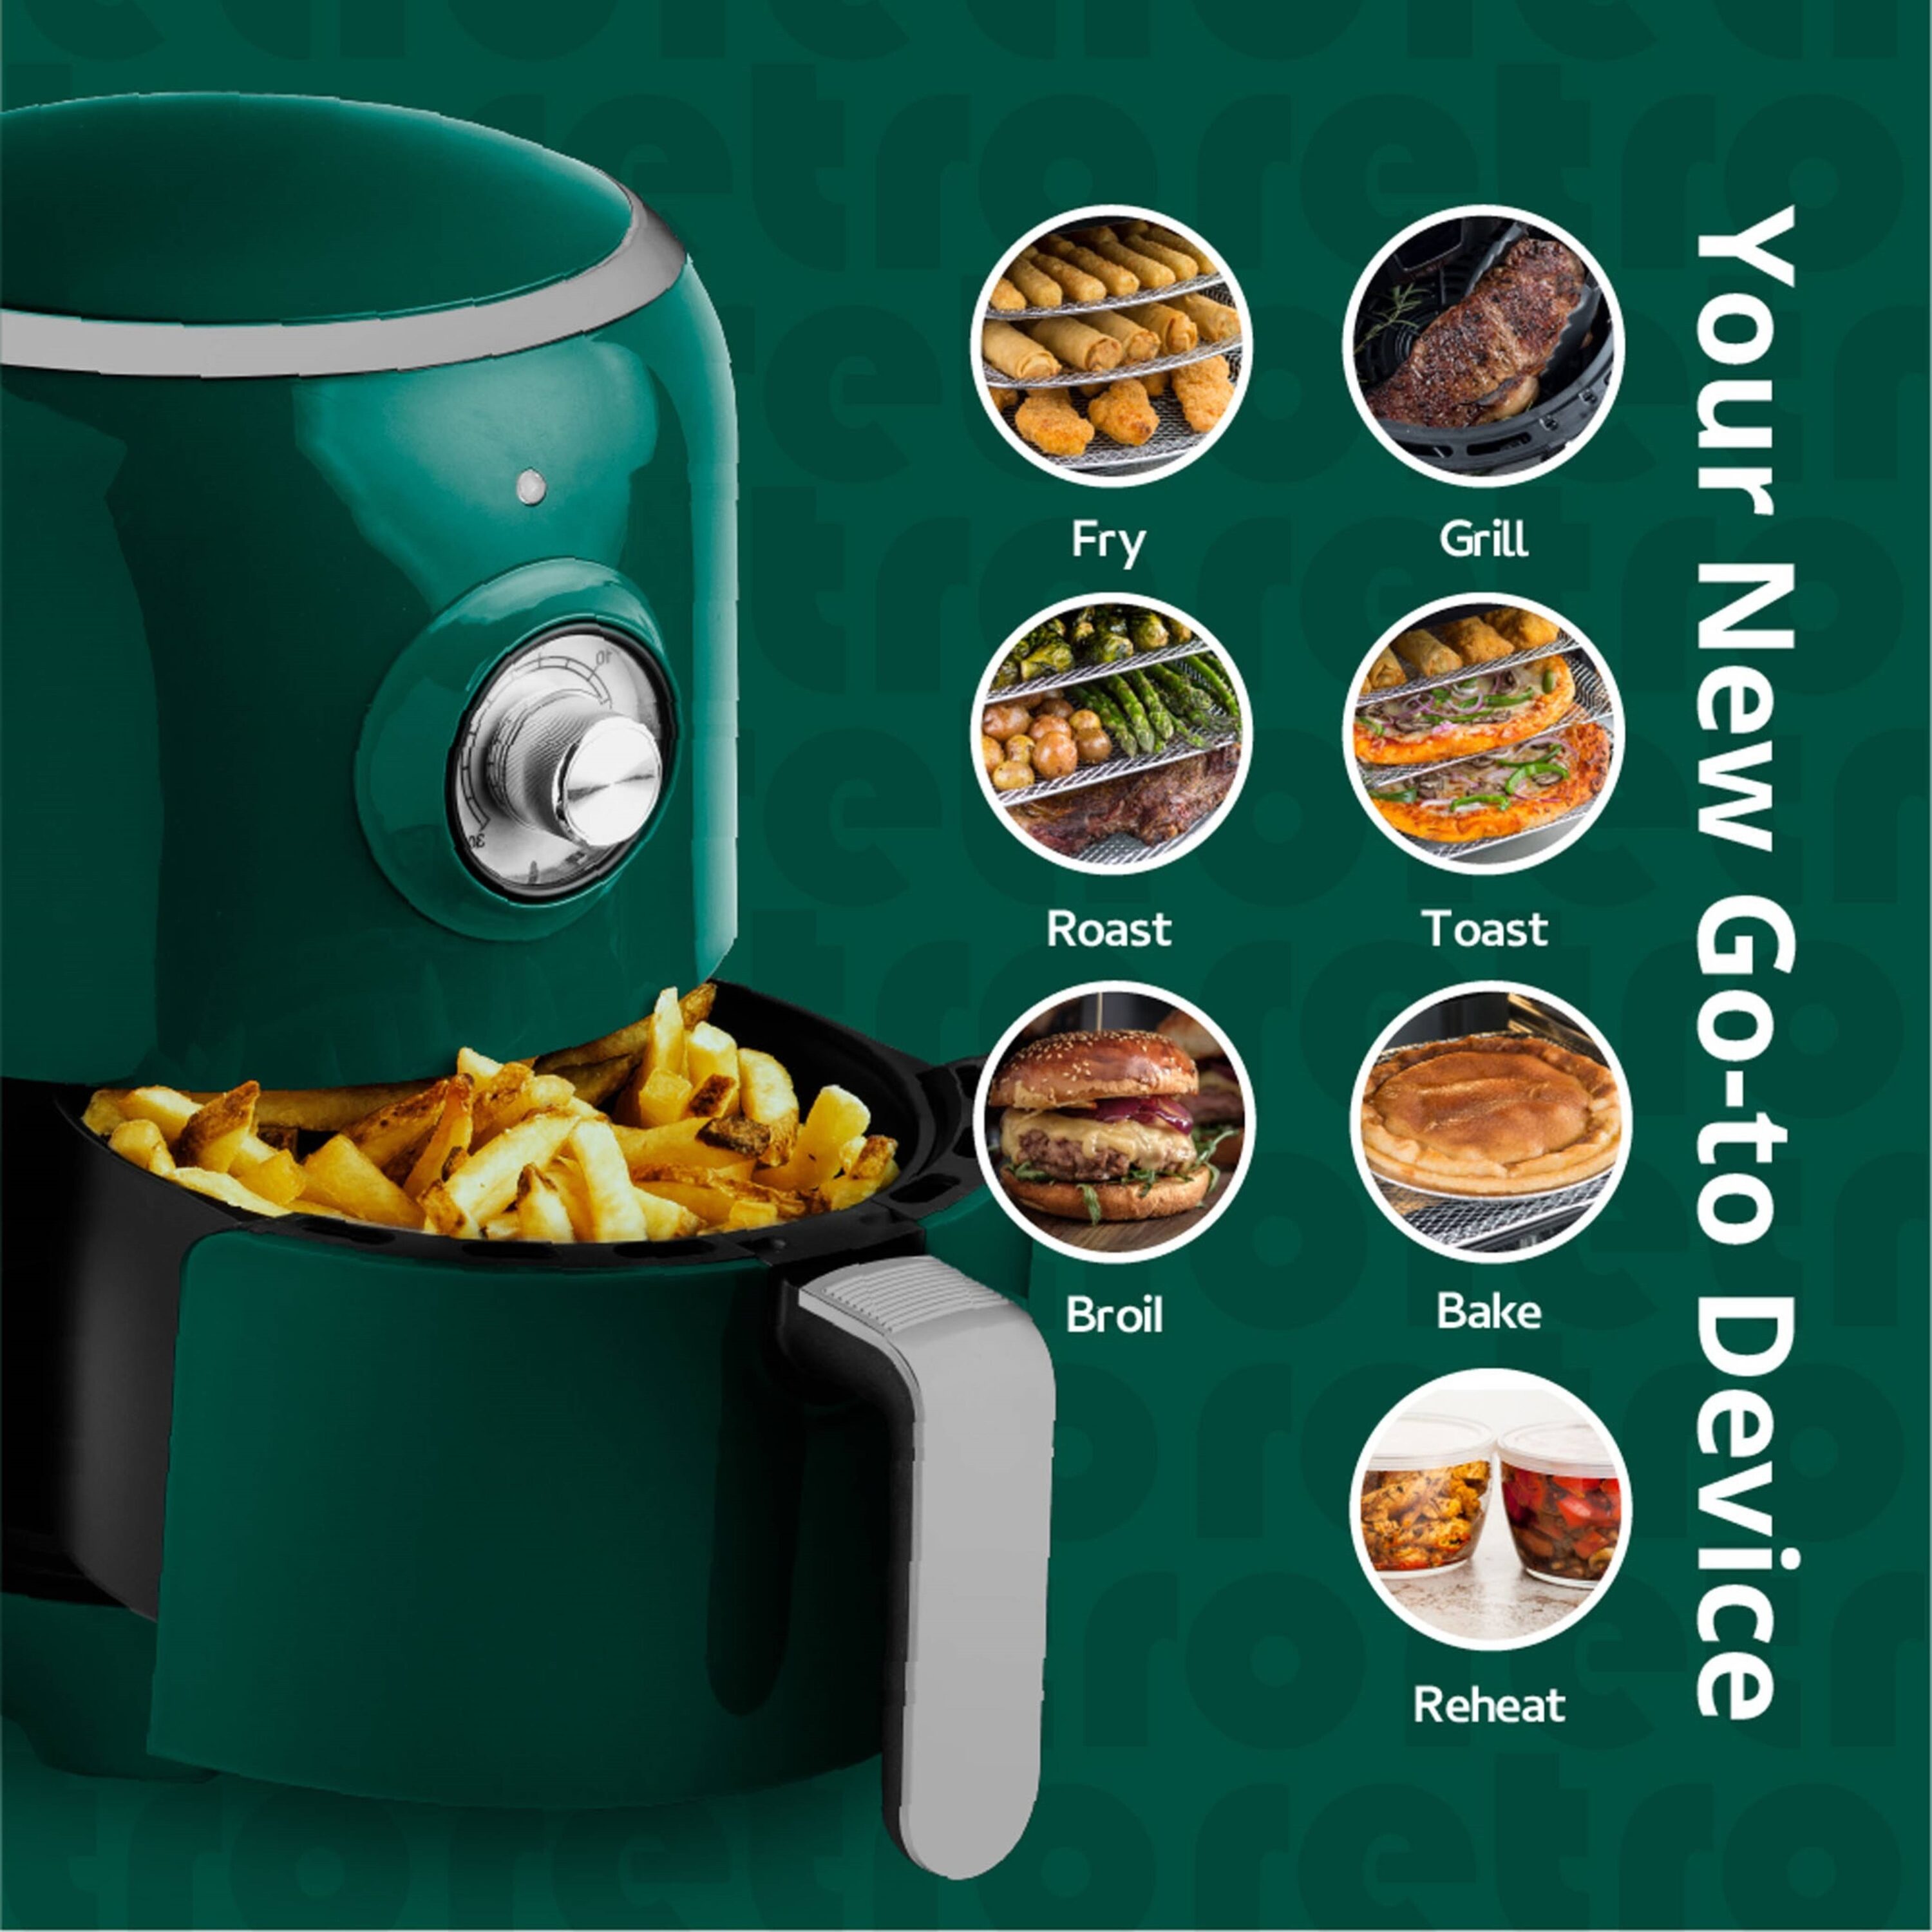 Aria 7 Qt. Ceramic Family-size Air Fryer With Accessories and Full Color  Recipe for sale online